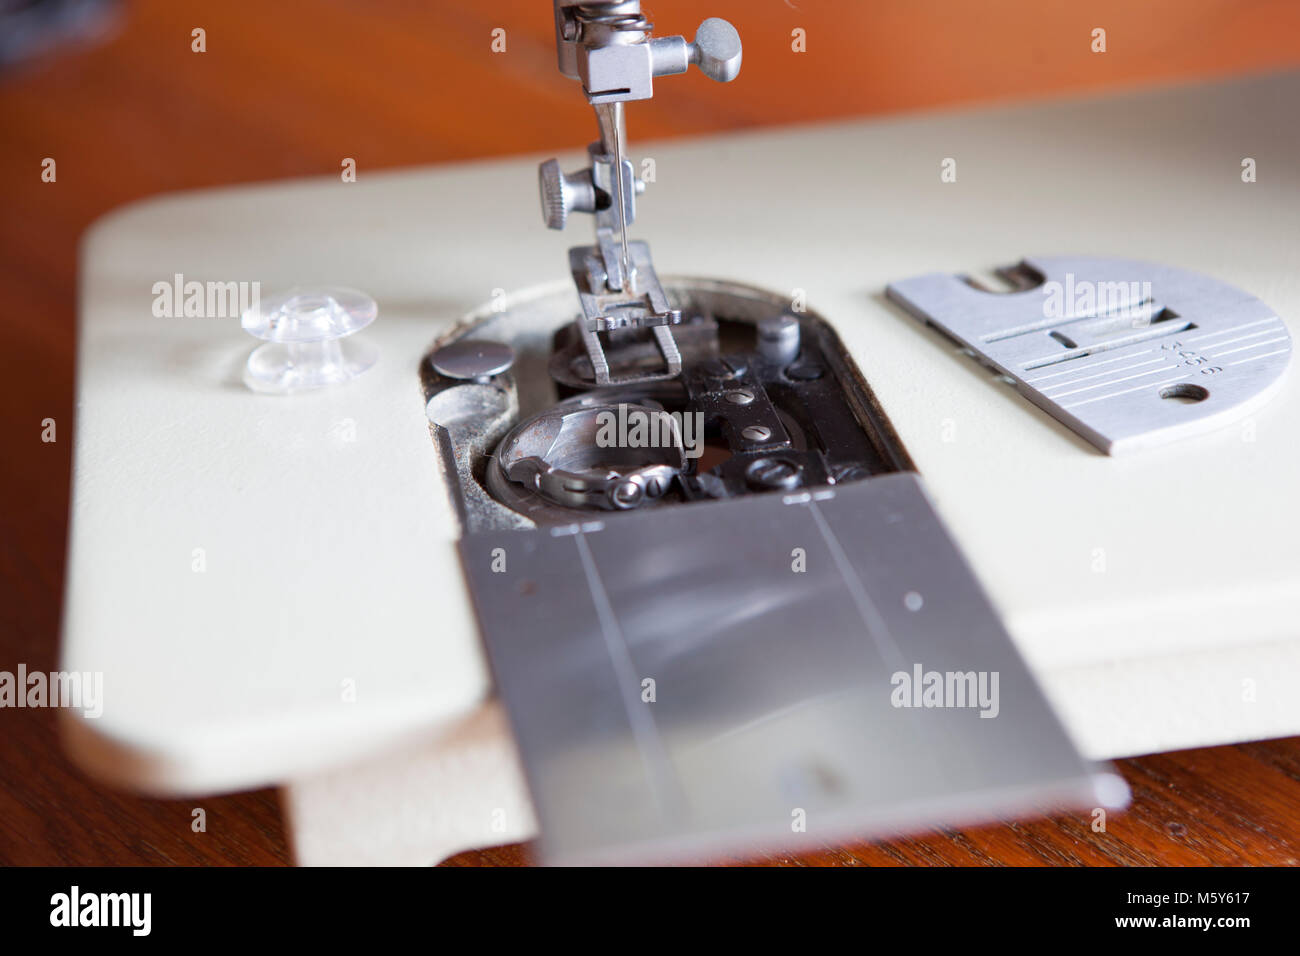 Sewing Machine Needle and Feed Dogs Closeup Stock Photo